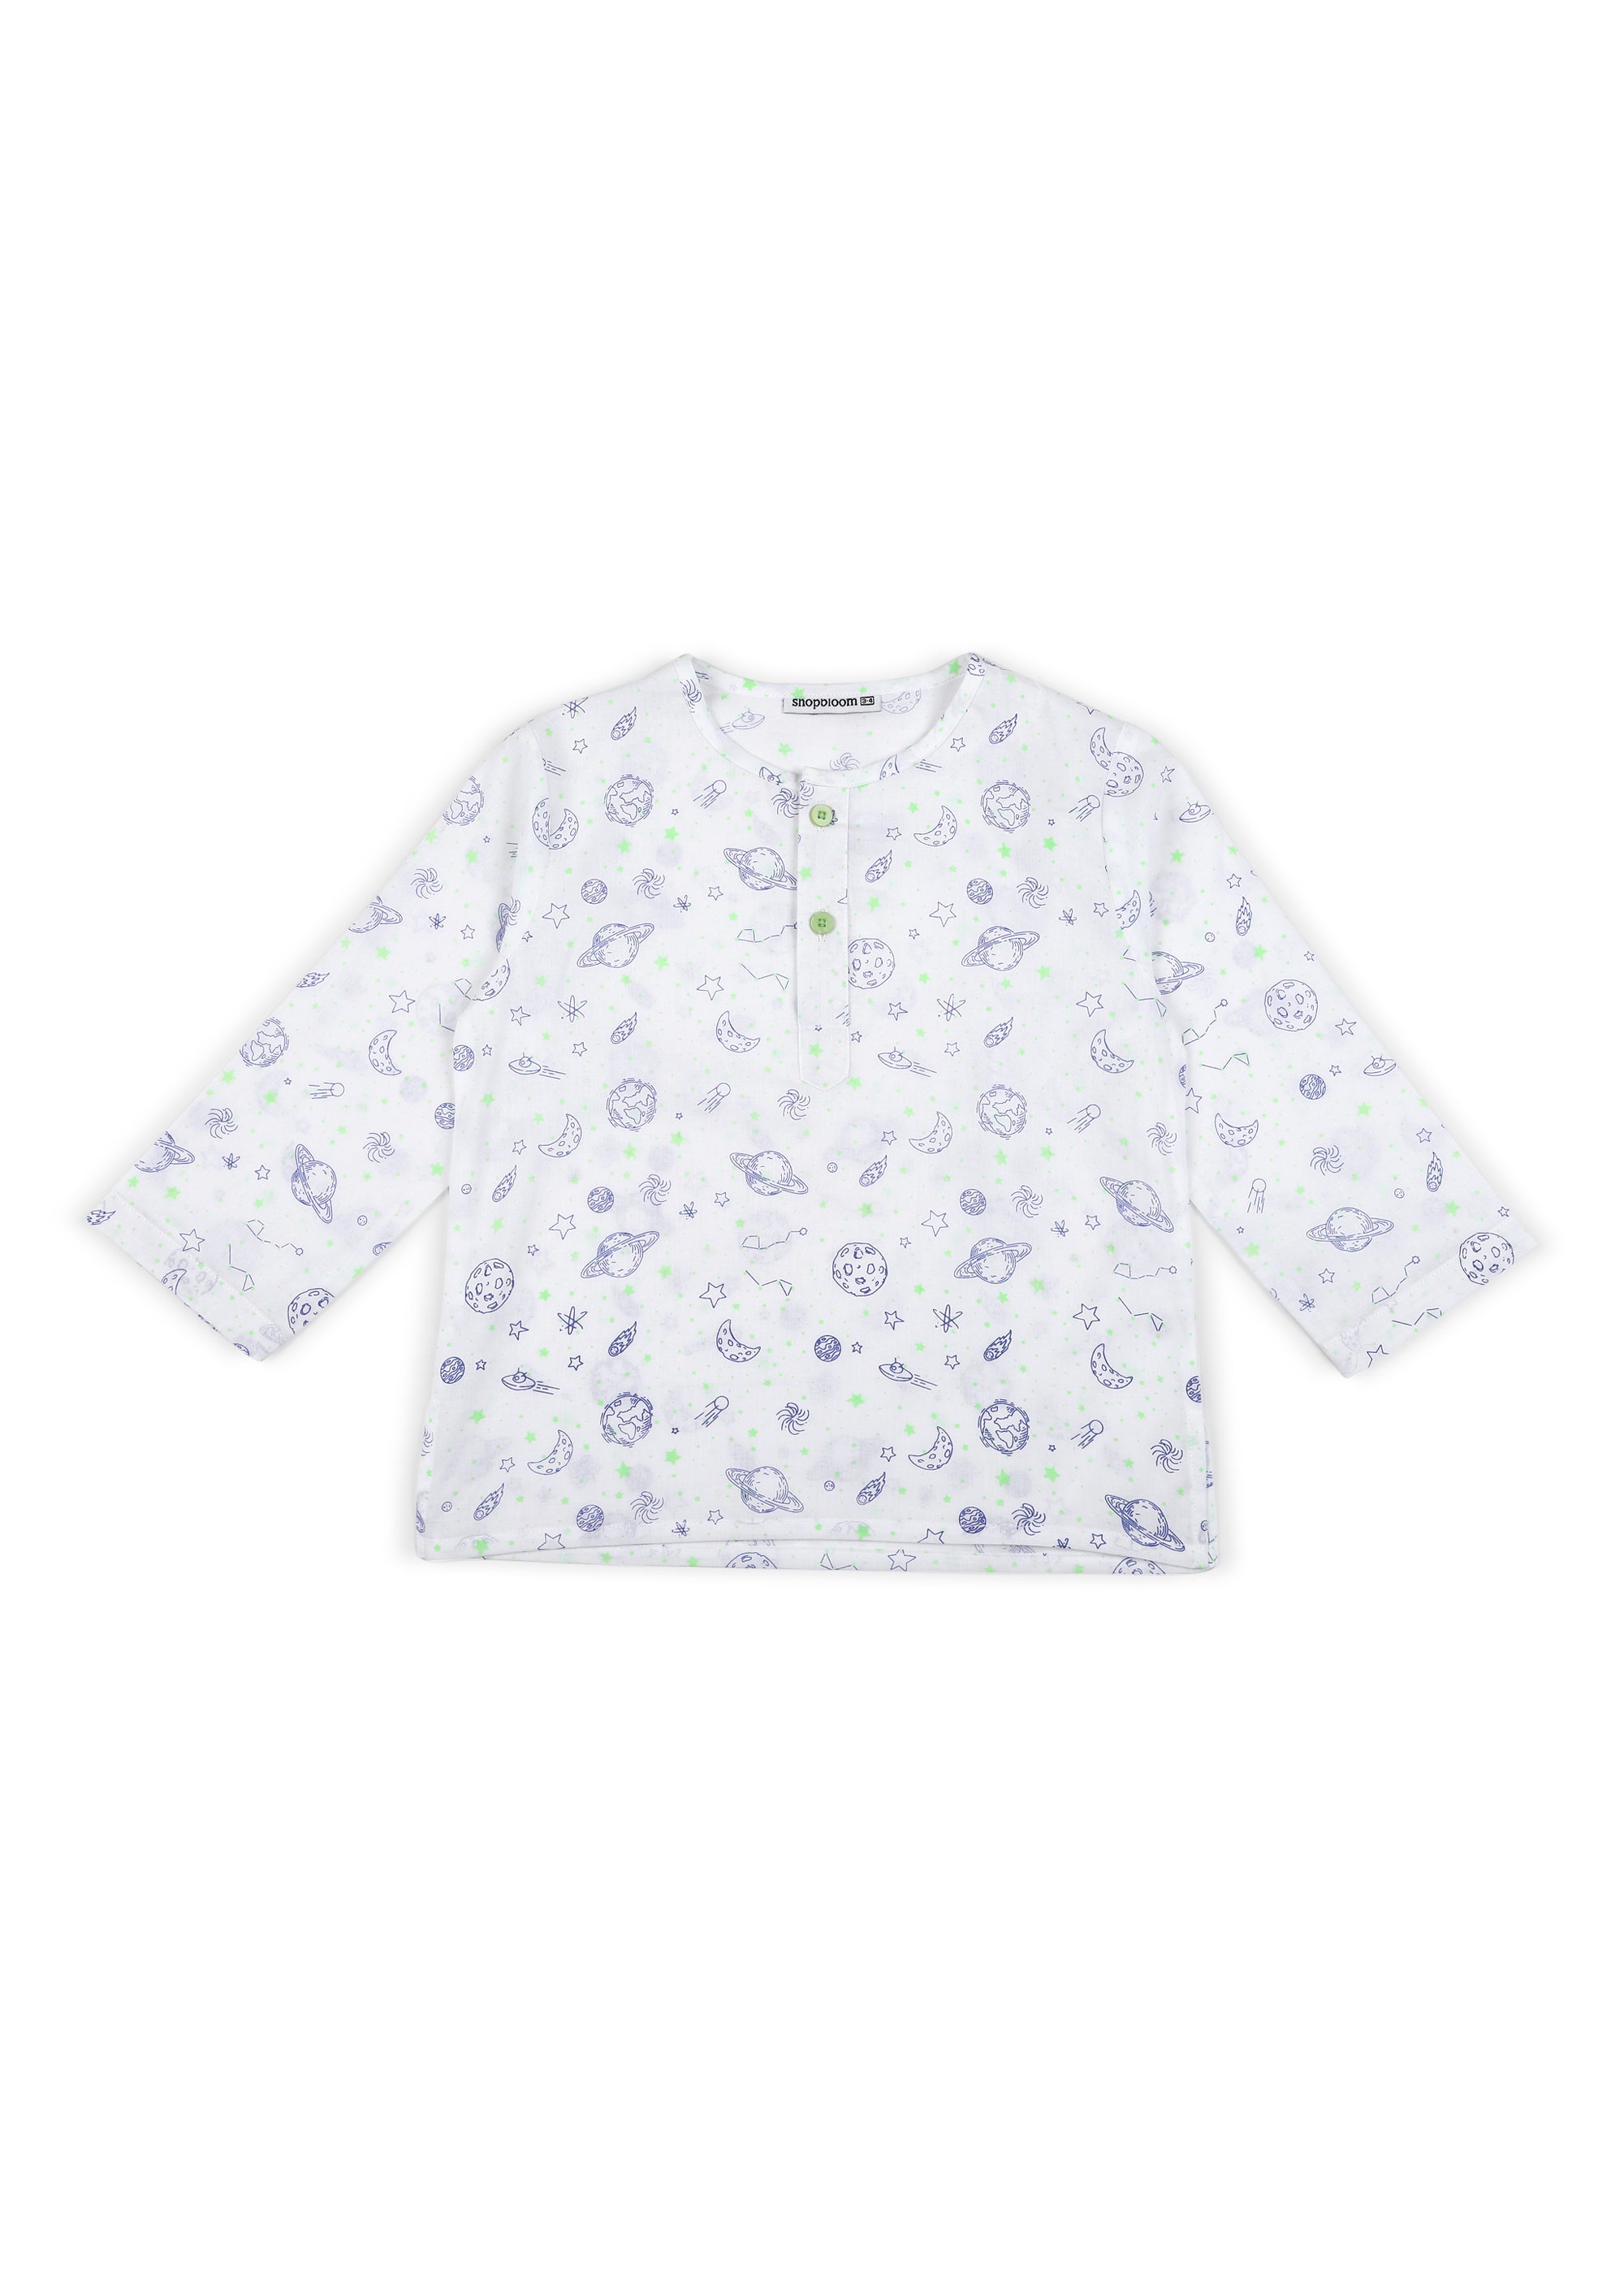 White Space Glow In The Dark Print Round Neck Long Sleeve Kids Night Suit